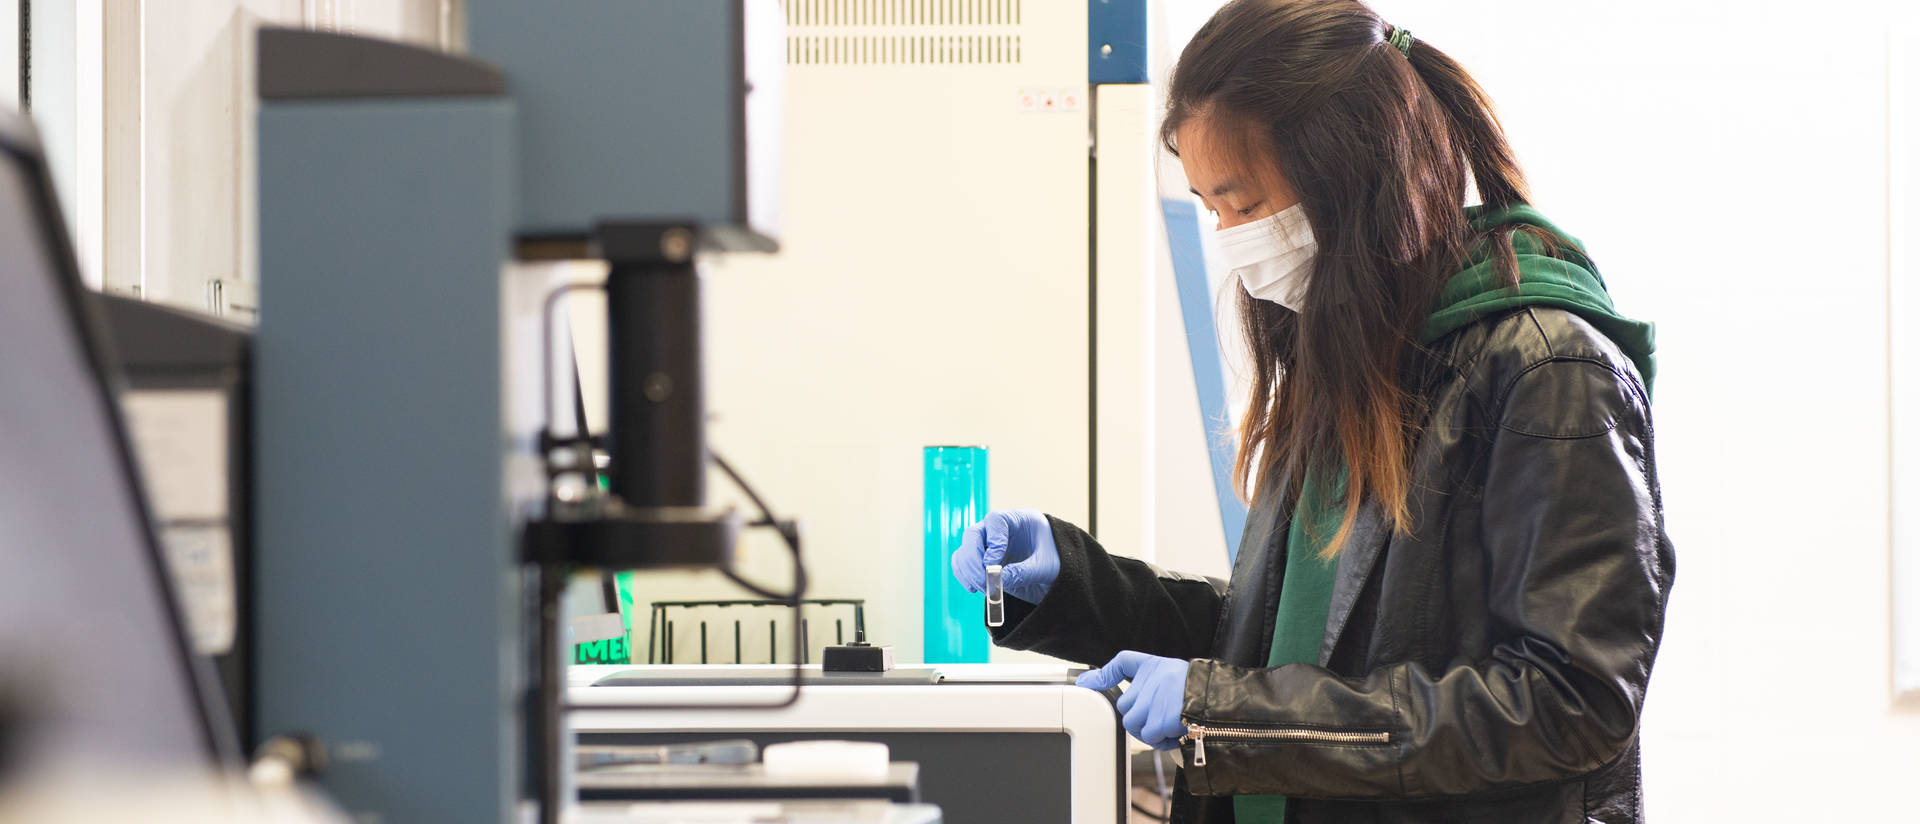 A materials science student works on a capstone project in the lab.